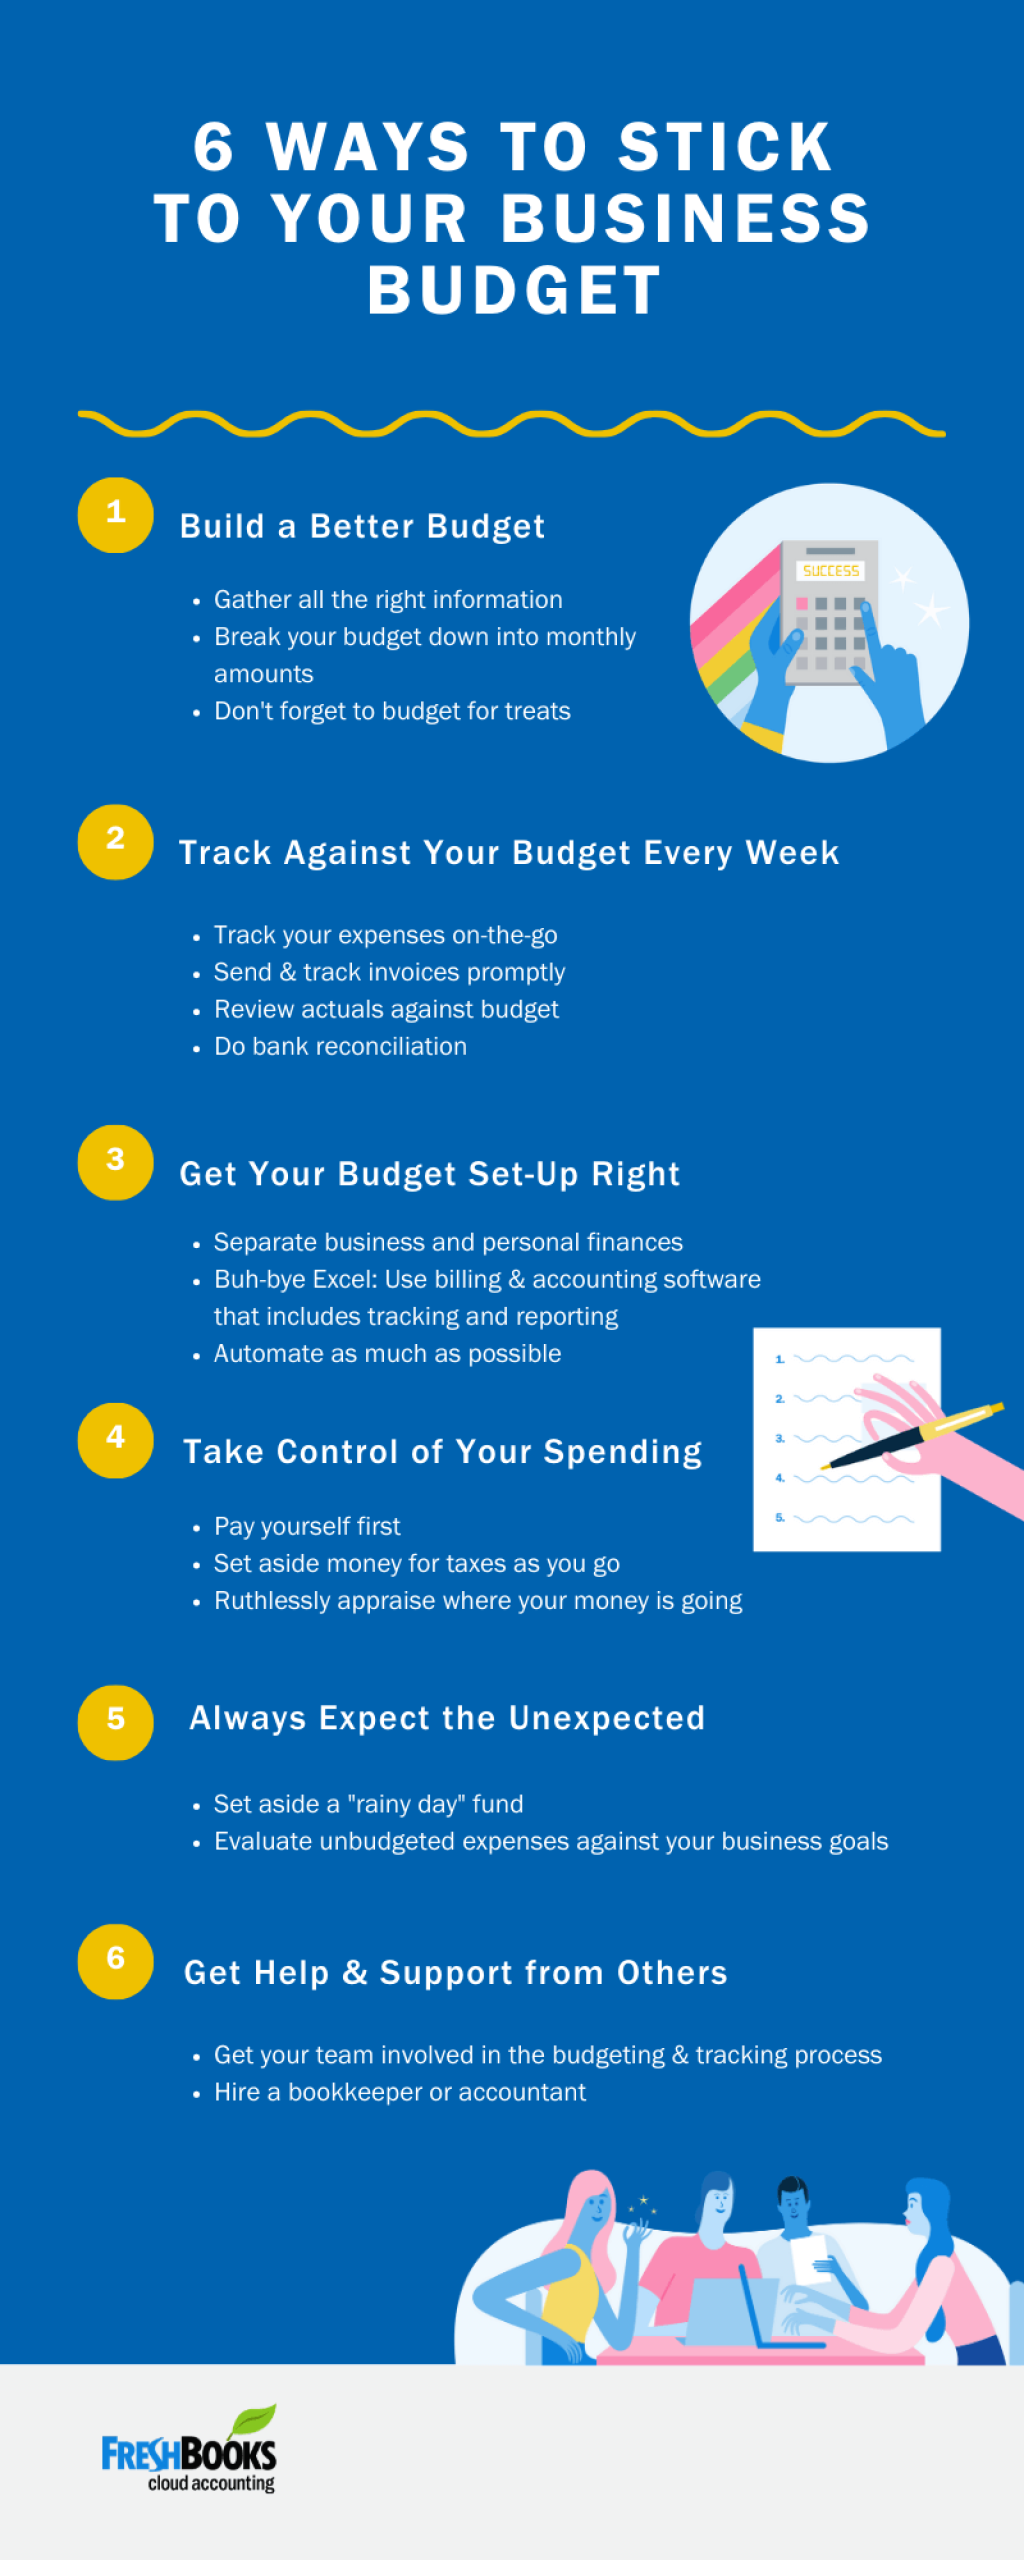 5 budgeting tips for business - Better Budget Management: How to Stick to a Budget  FreshBooks Blog